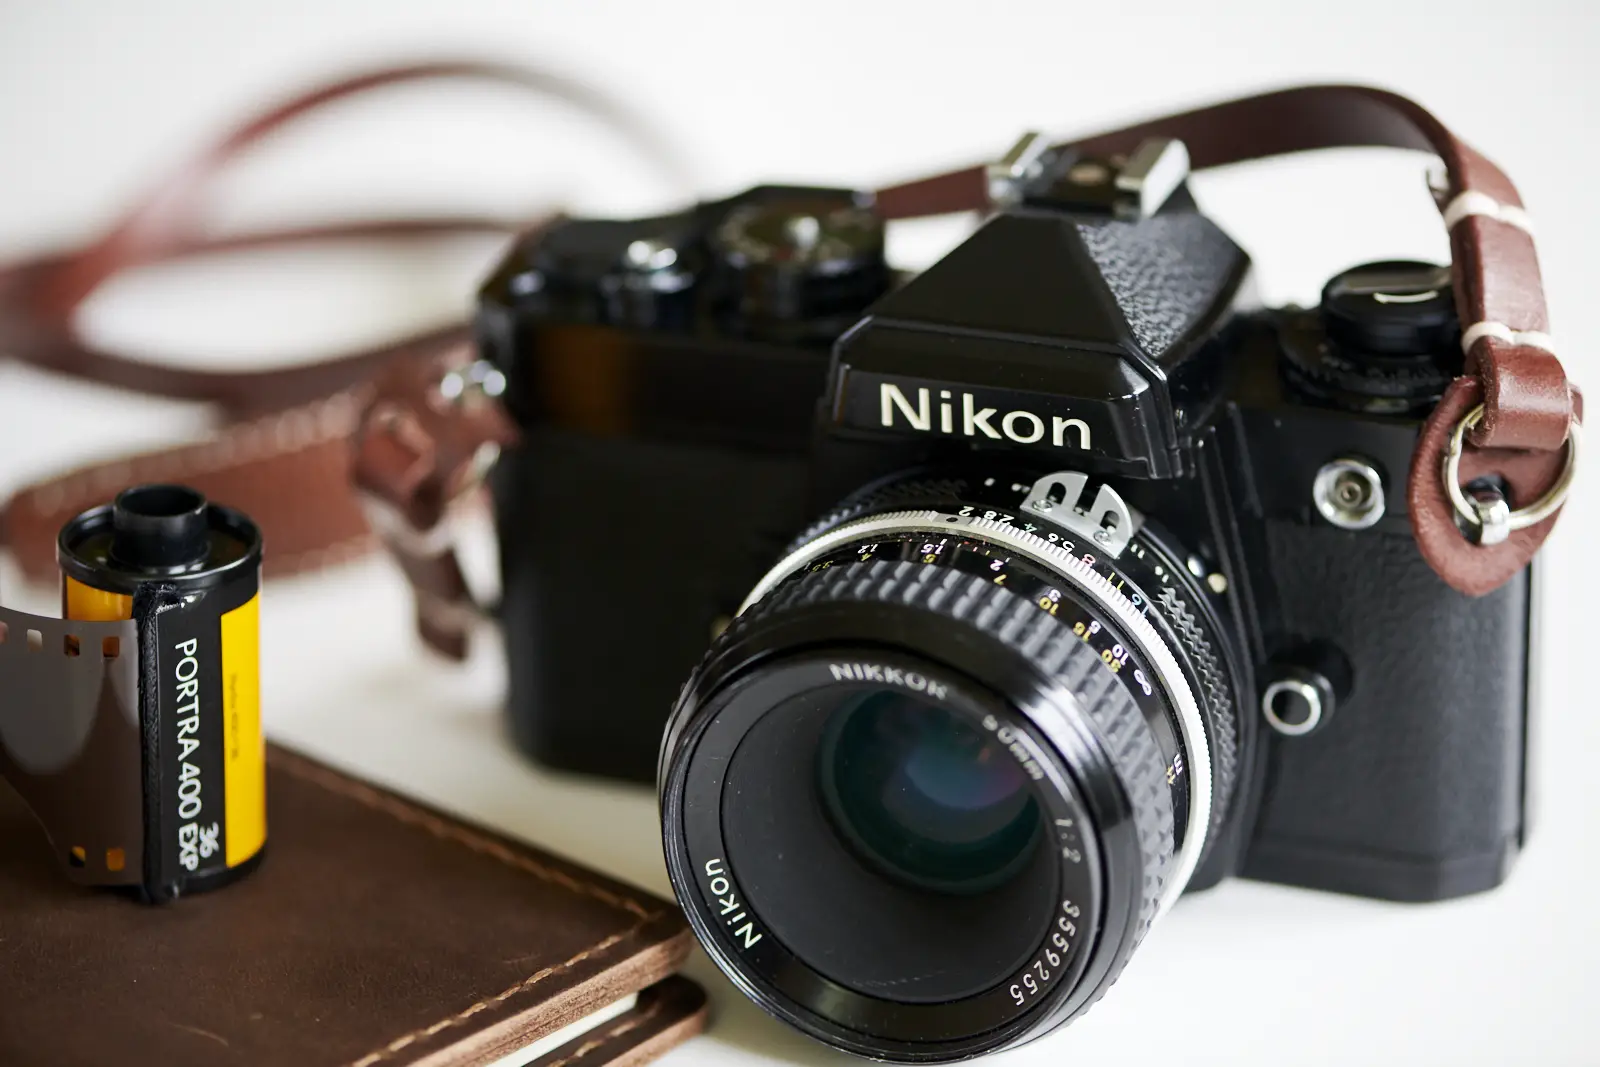 Nikon FE Review - Returning to Film with a Fun, Compact